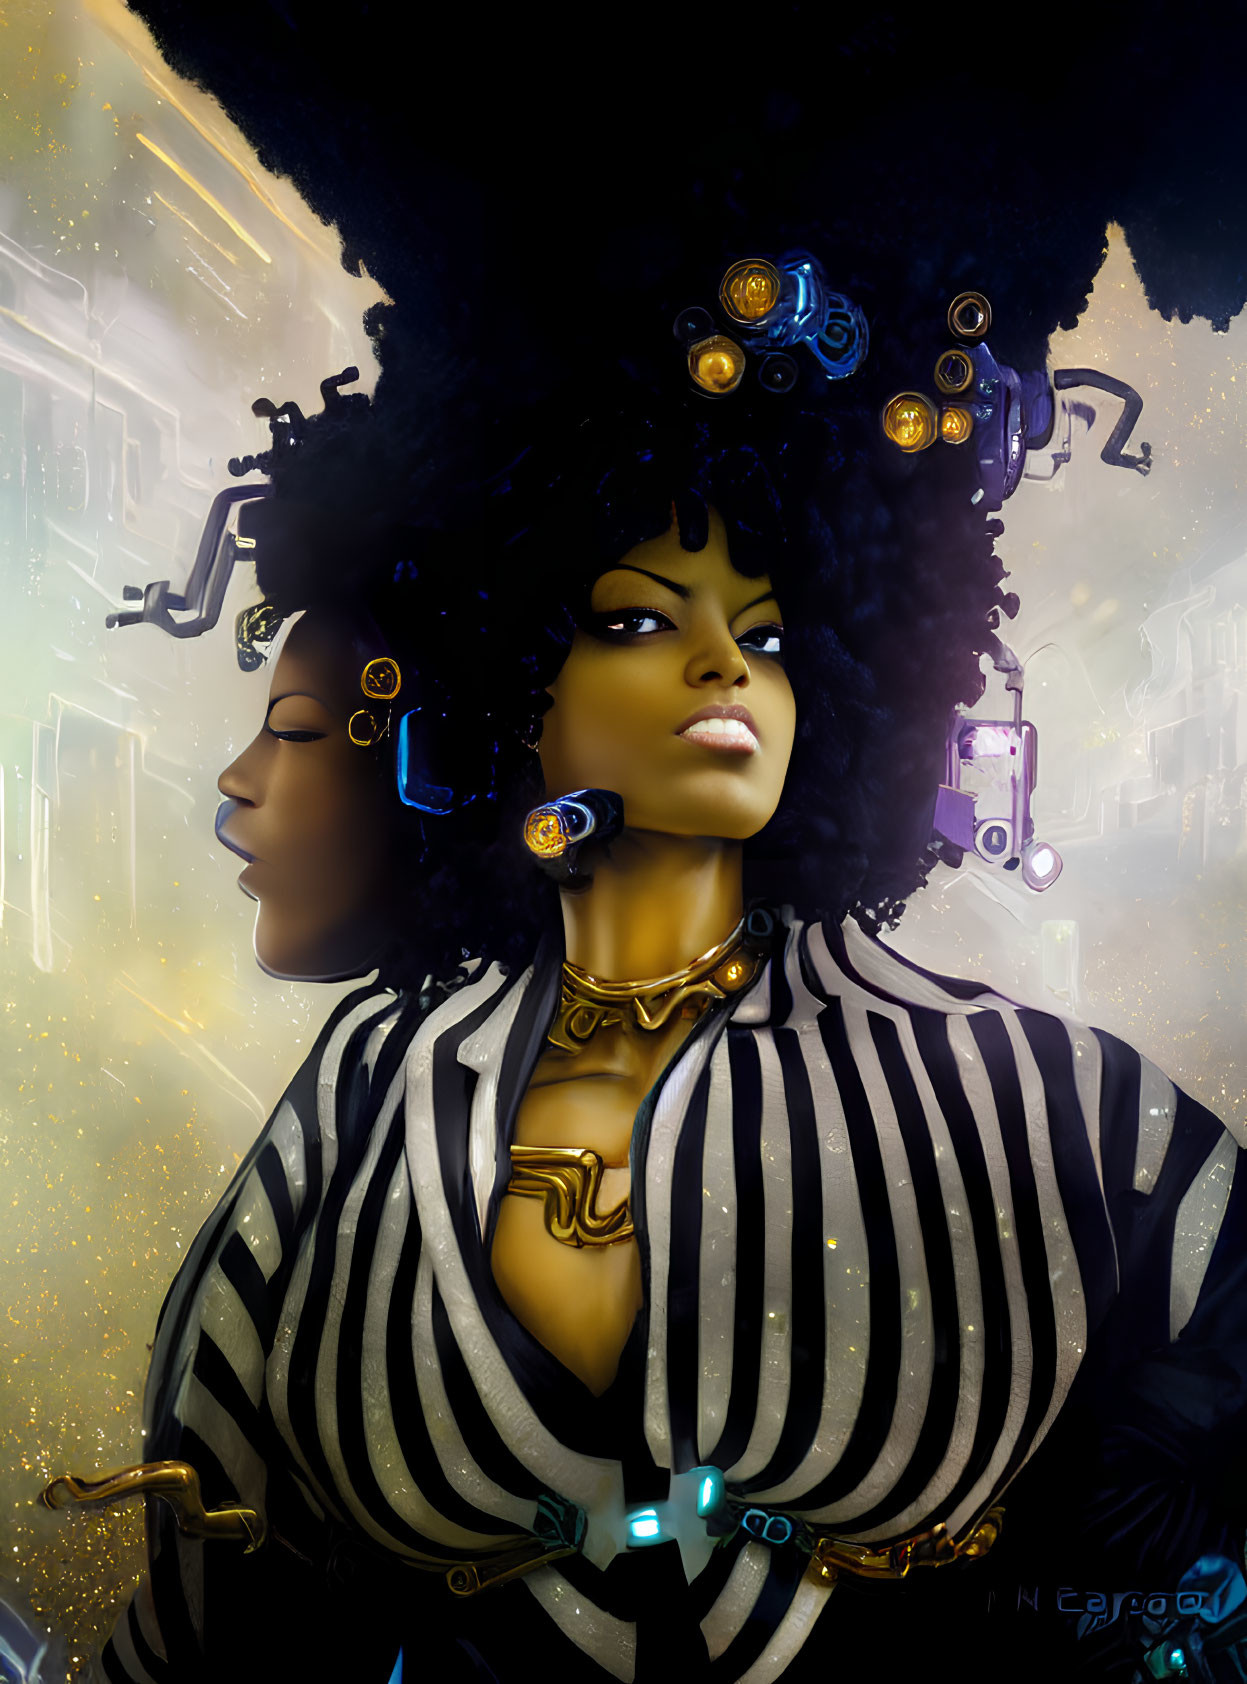 Futuristic digital art: Two women with cybernetic afro hairstyles on golden background